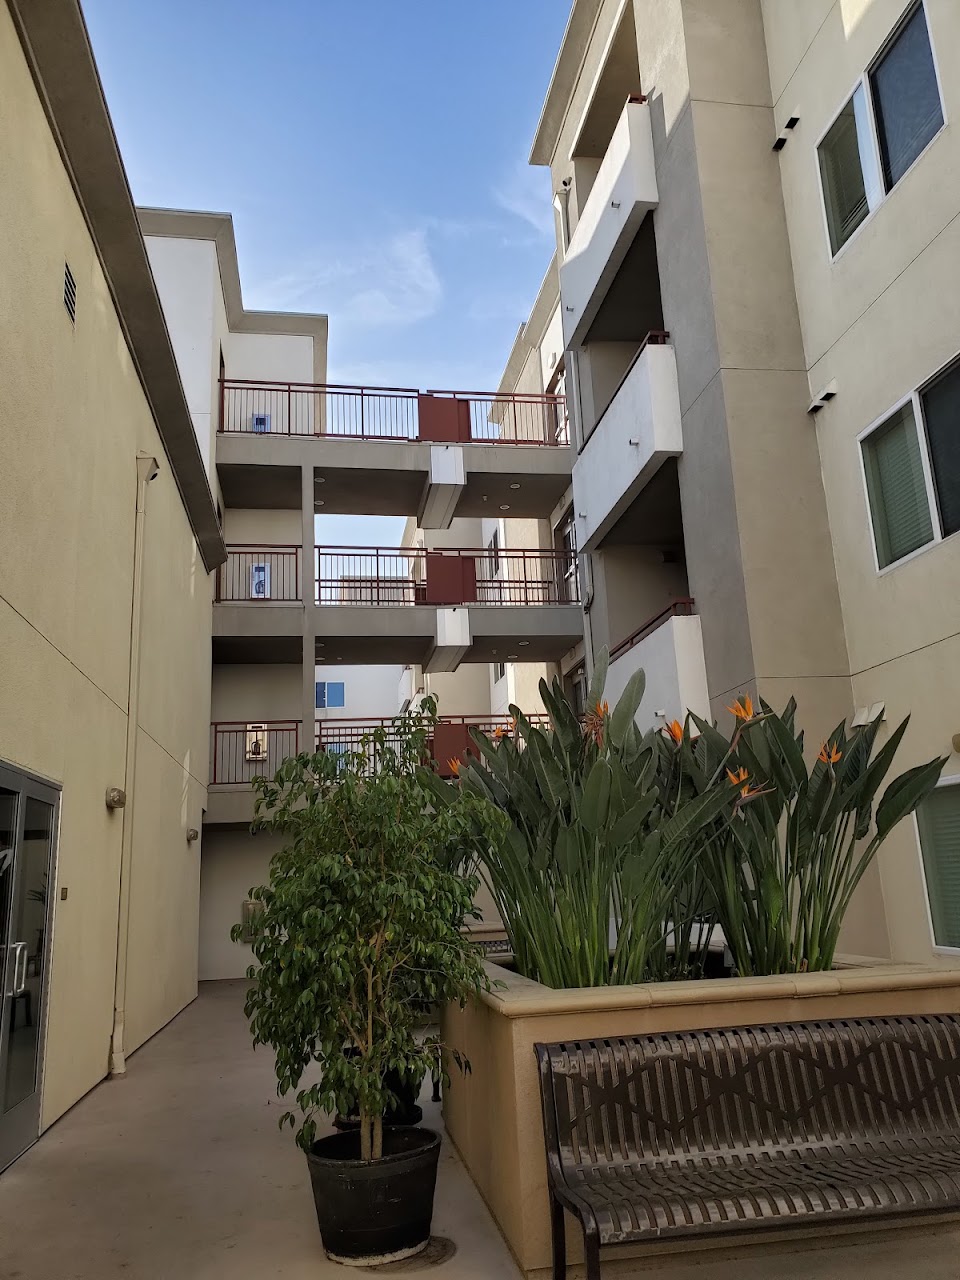 Photo of CALDEN COURT APARTMENTS. Affordable housing located at 8901 CALDEN AVENUE SOUTH GATE, CA 90280